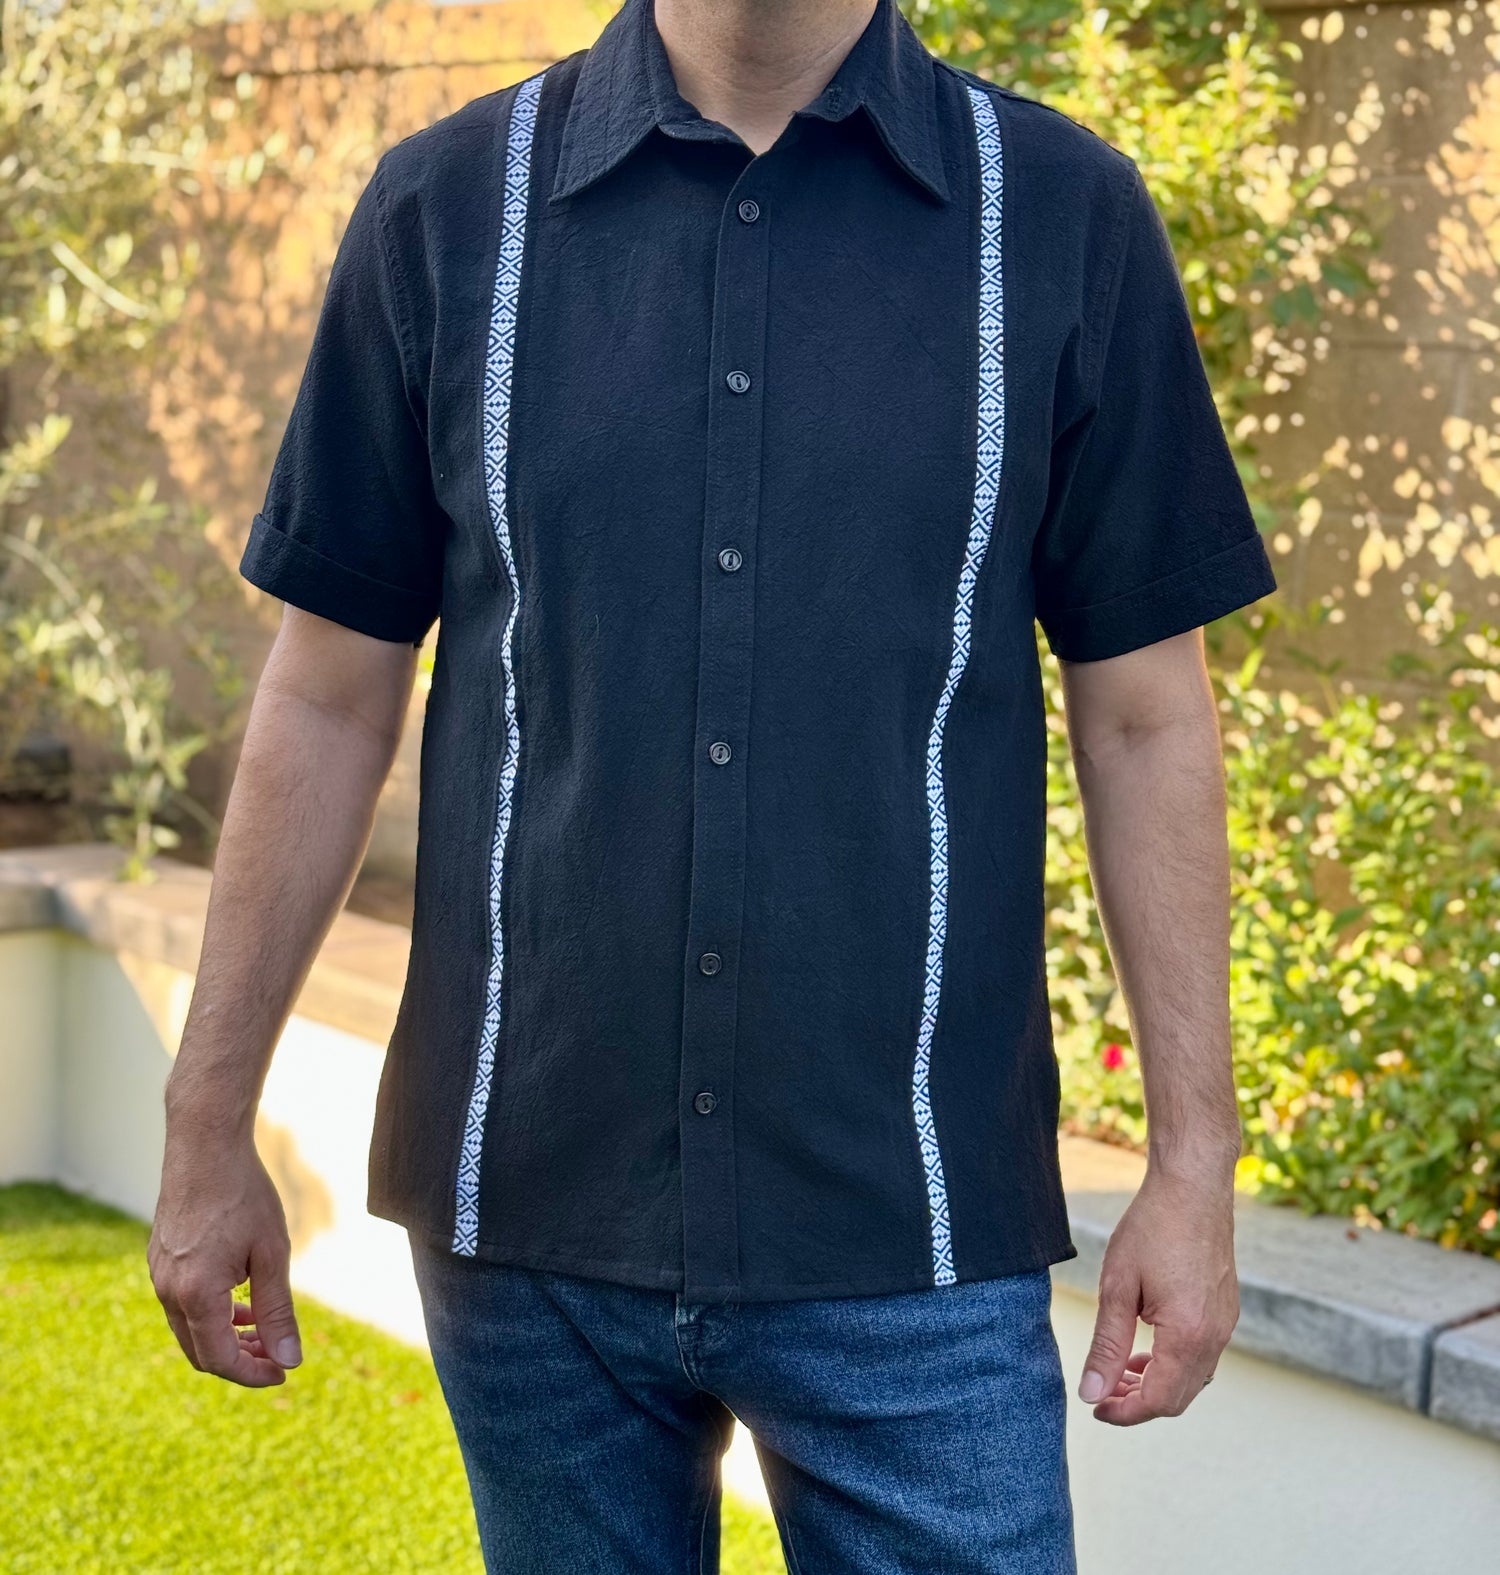 Black Guayabera Father's Day Gift Artisan Made in Mexico 100% Cotton Men's Shirt